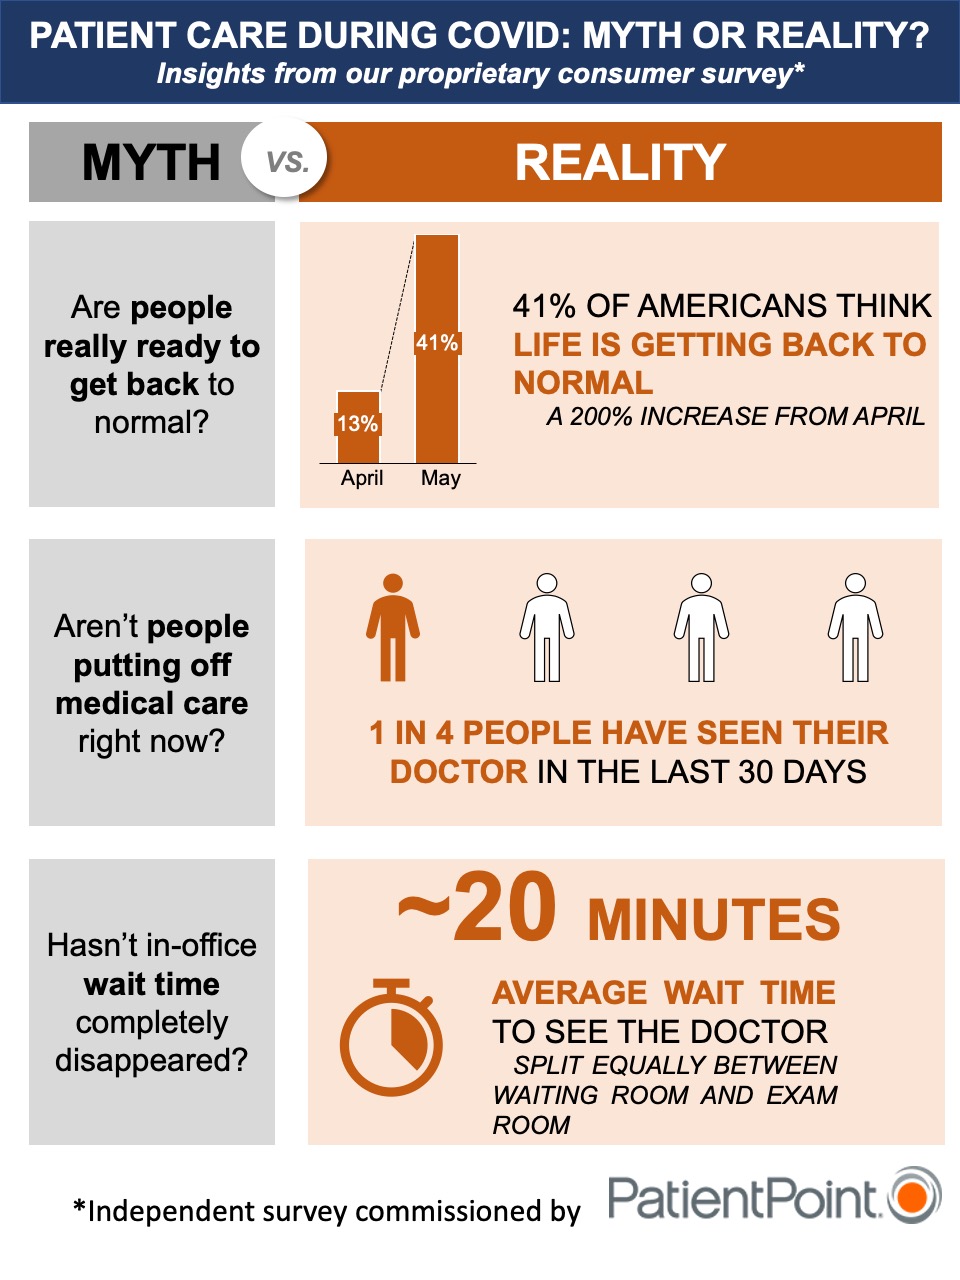 An infographic depicting recent stats on patient attitudes and behaviors about going to the doctor during COVID-19.